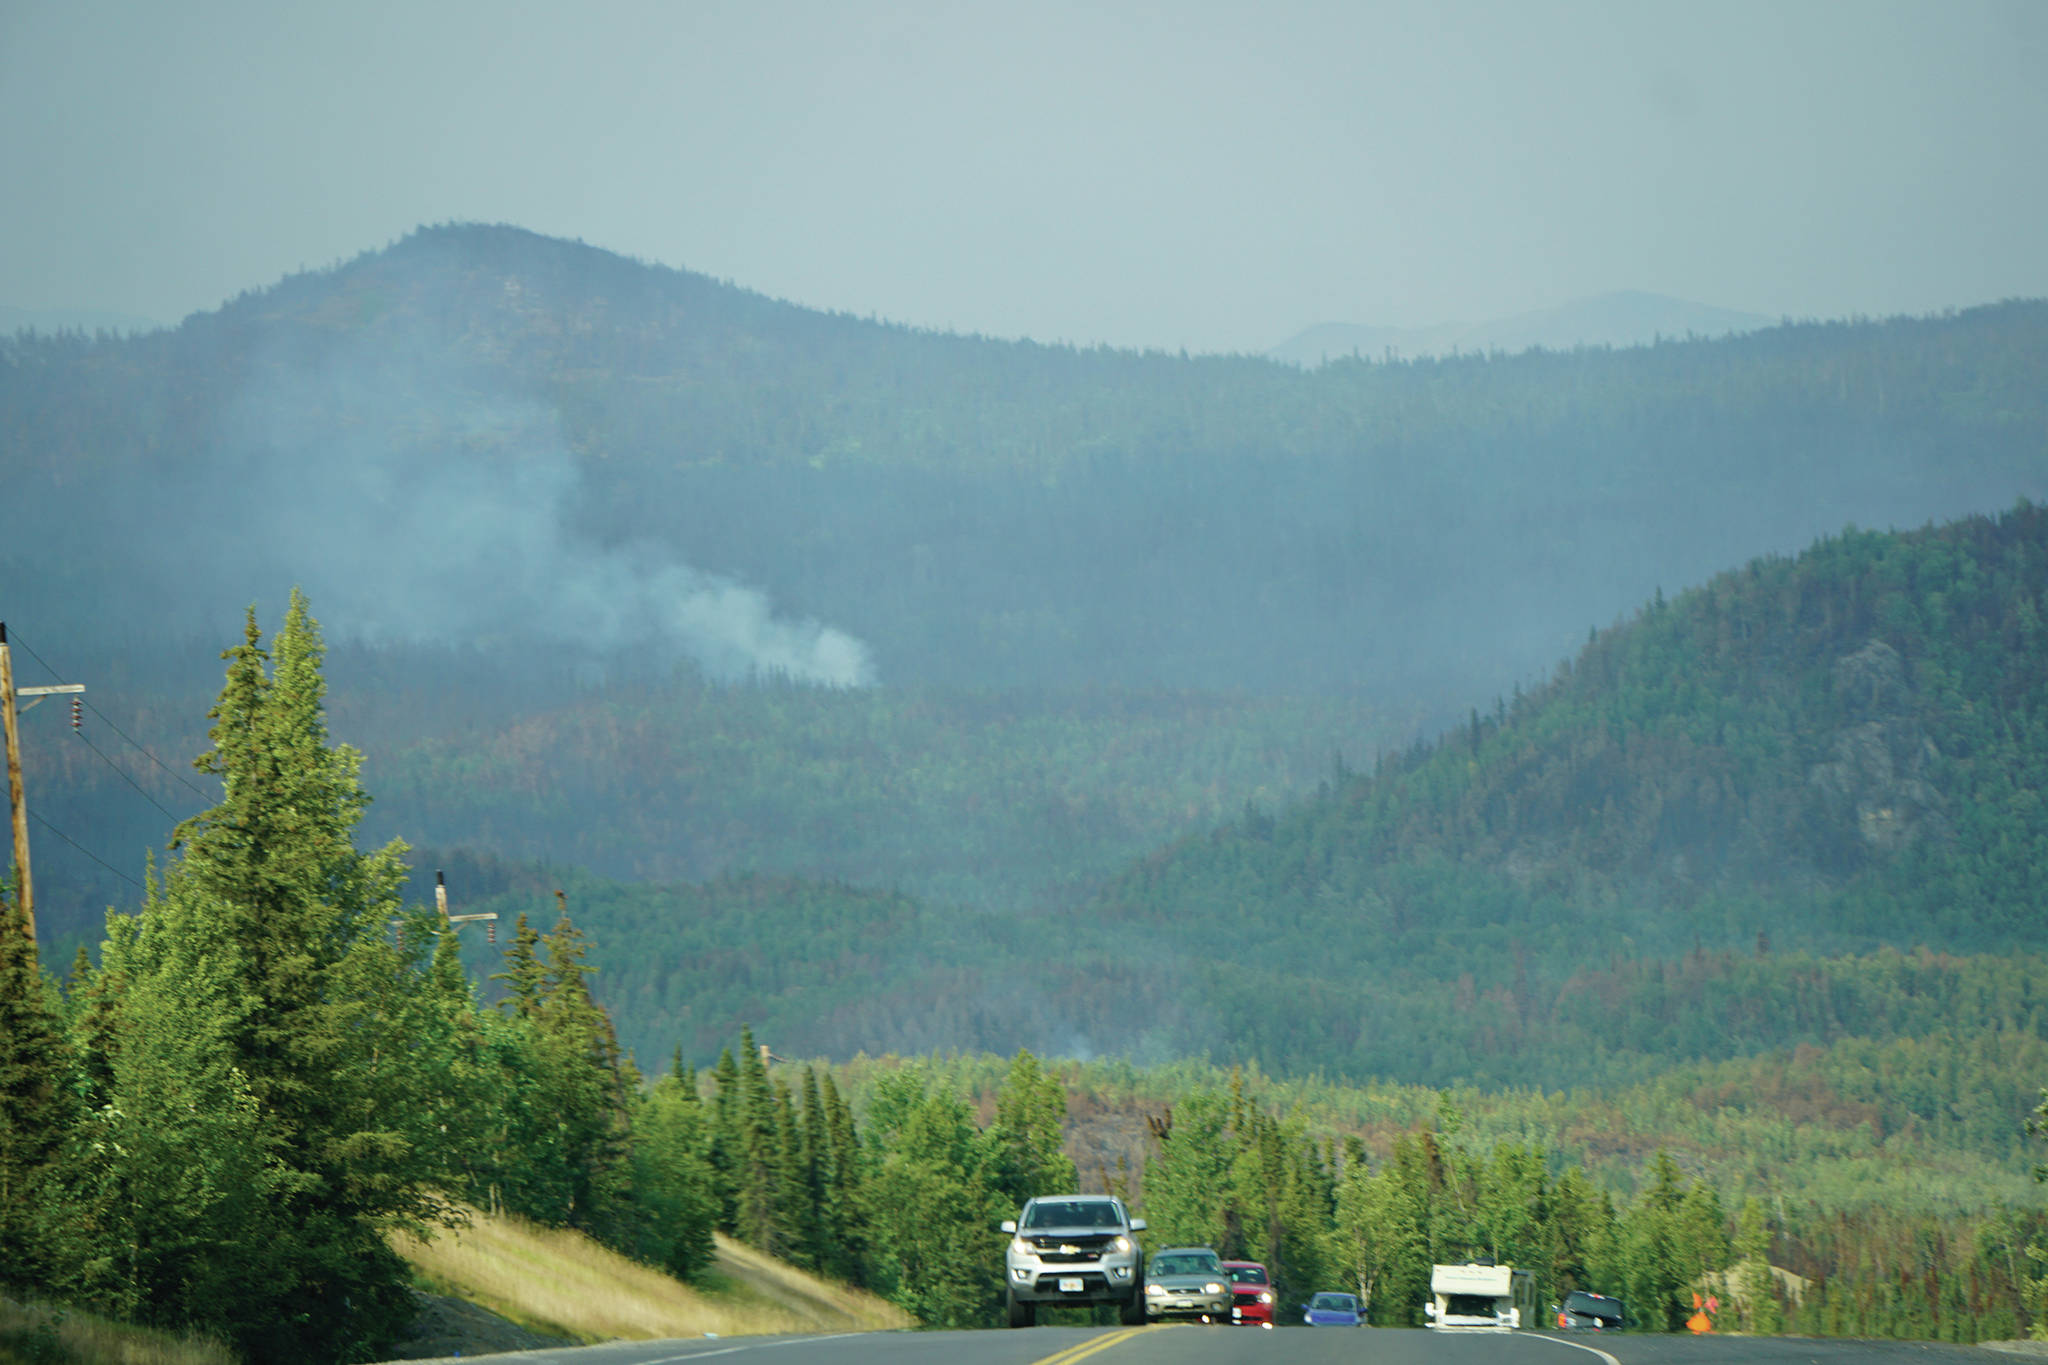 A plume of smoke rises from the Swan Lake fire area as vehicles head south on the Sterling Highway on July 18, 2019, near Skilak Lake, Alaska. (Photo by Michael Armstrong/Homer News)